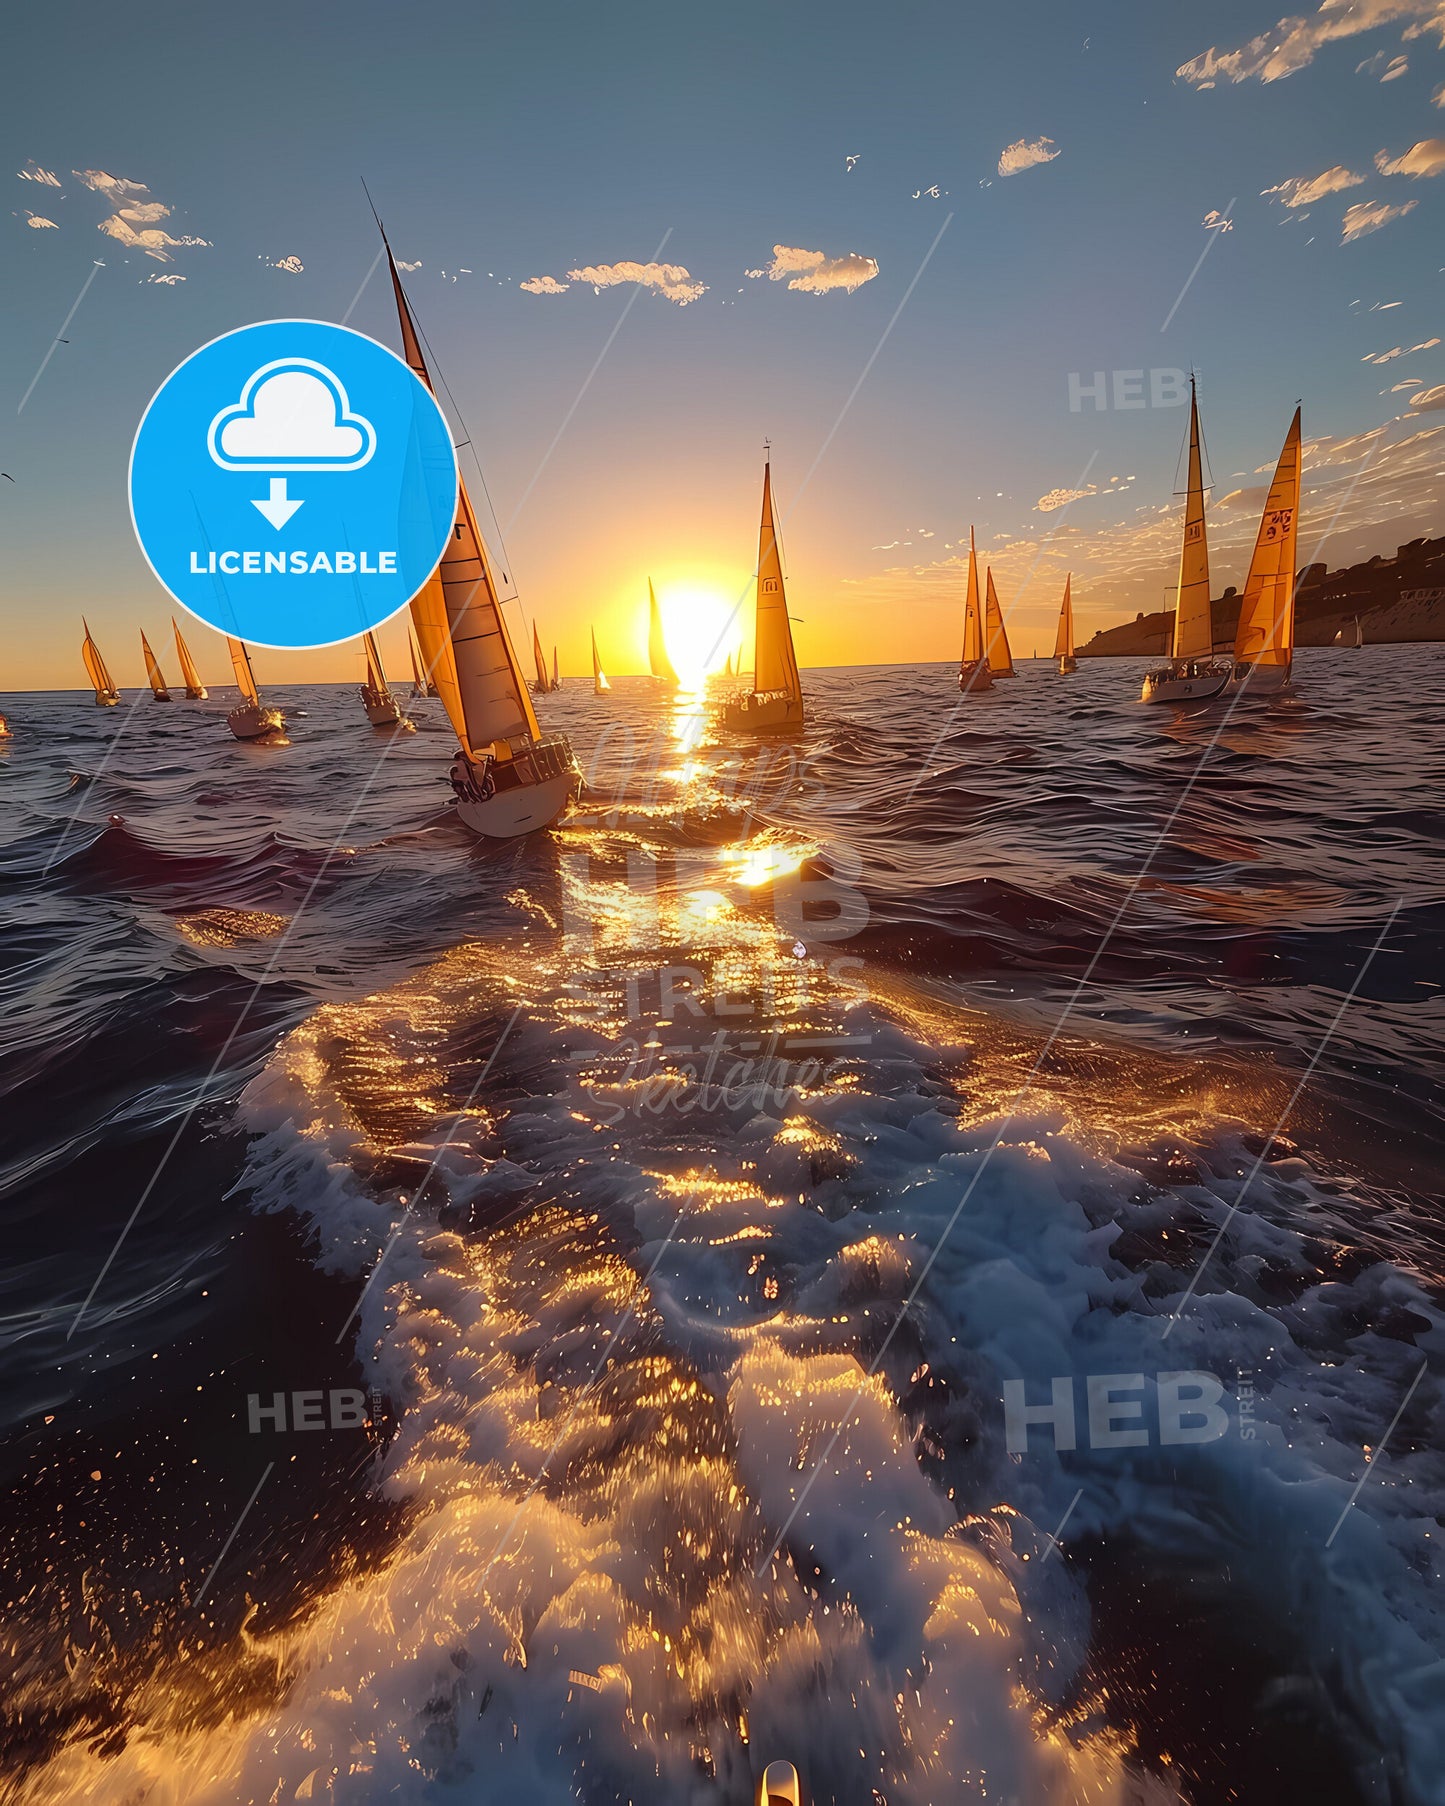 Vibrant seascape painting. Panoramic view sailboat race. Group of sailboats on the water. The point of view of the camera inside one of the boats.